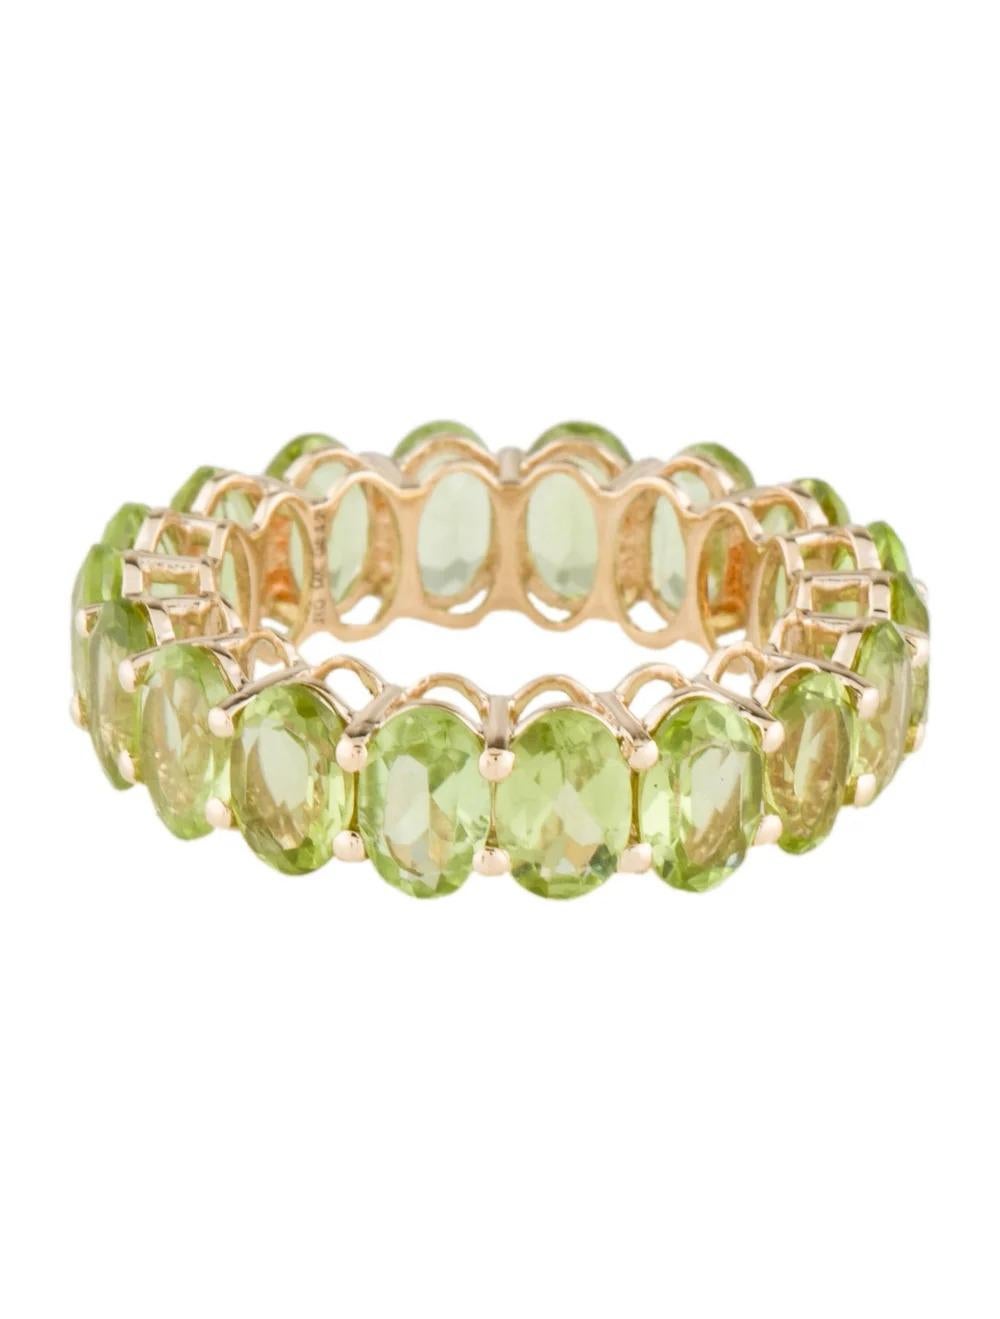 14K Peridot Eternity Band Ring - Size 7, Timeless Style, Vibrant Green Gemstones In New Condition For Sale In Holtsville, NY